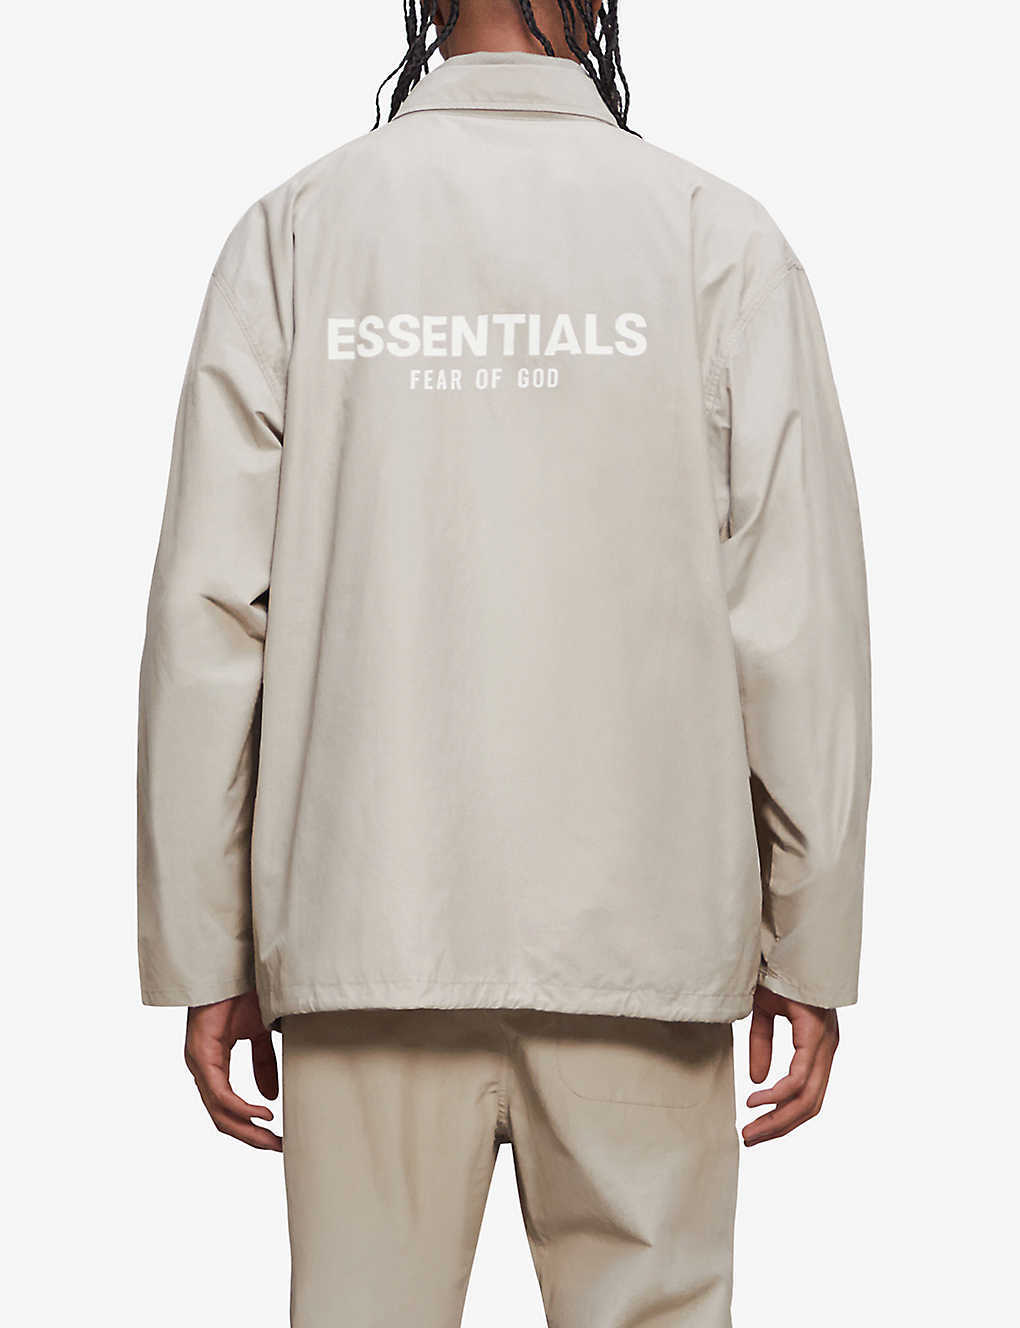 INSTOCK] Fear Of God Essentials SS21 Coach Jacket - MoreDeal 